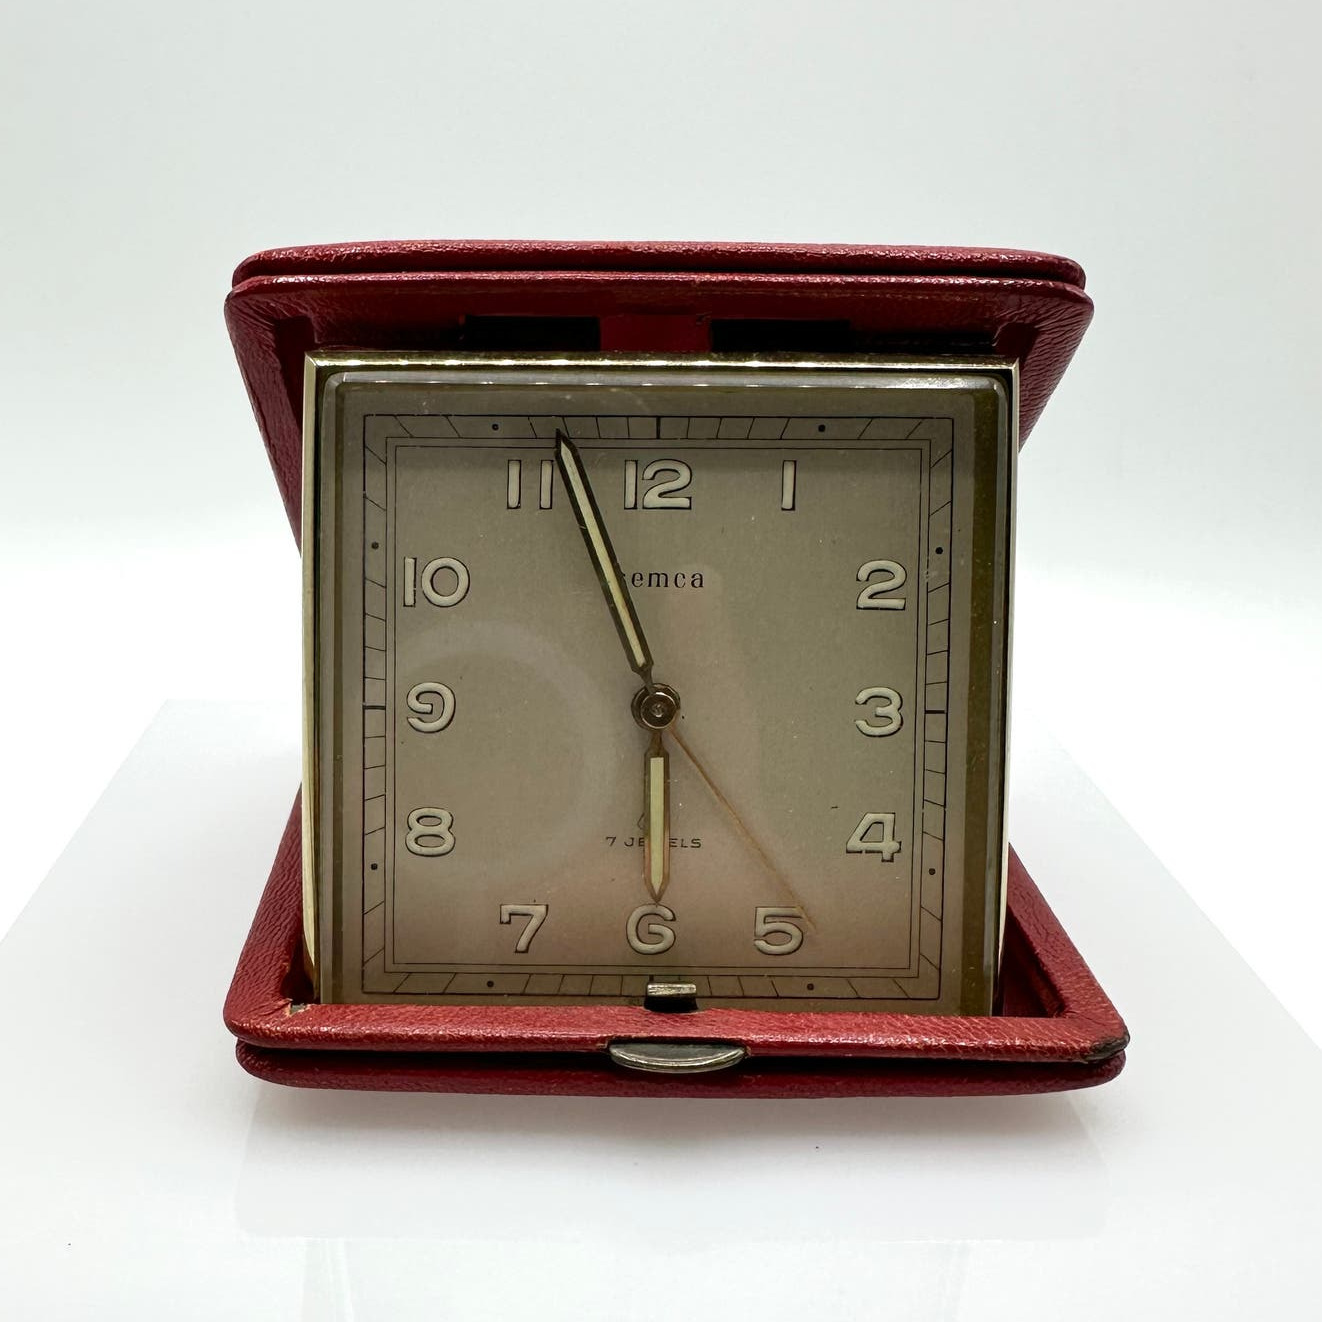 Vintage Semca Swiss Red Jewel Working Travel Clock with Foldable Leather Case